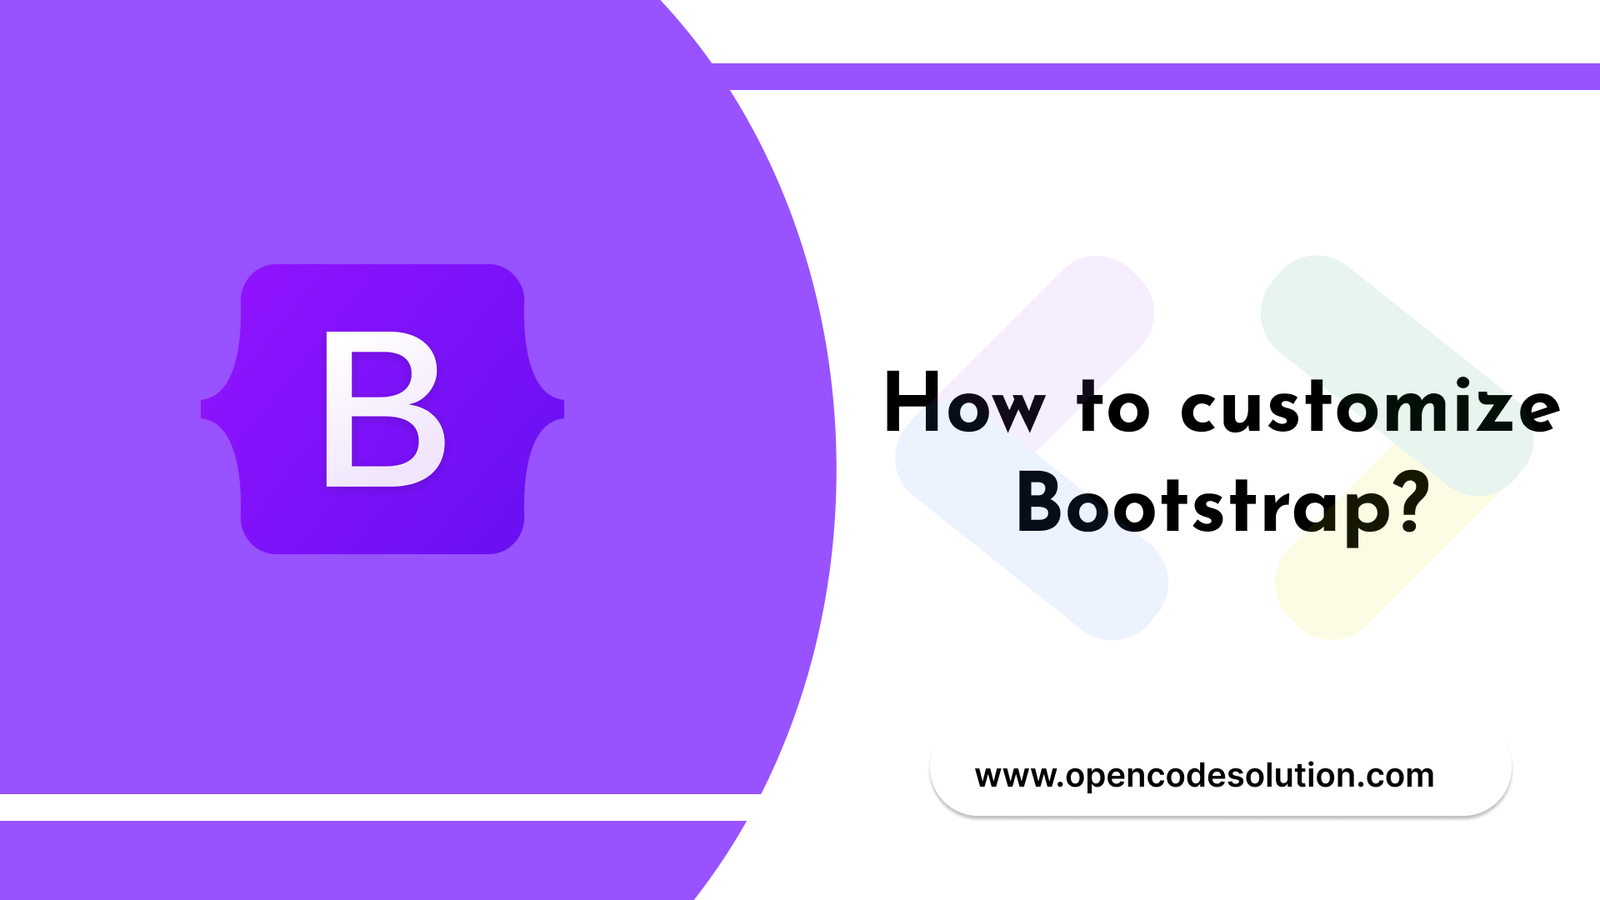 How to customize Bootstrap?